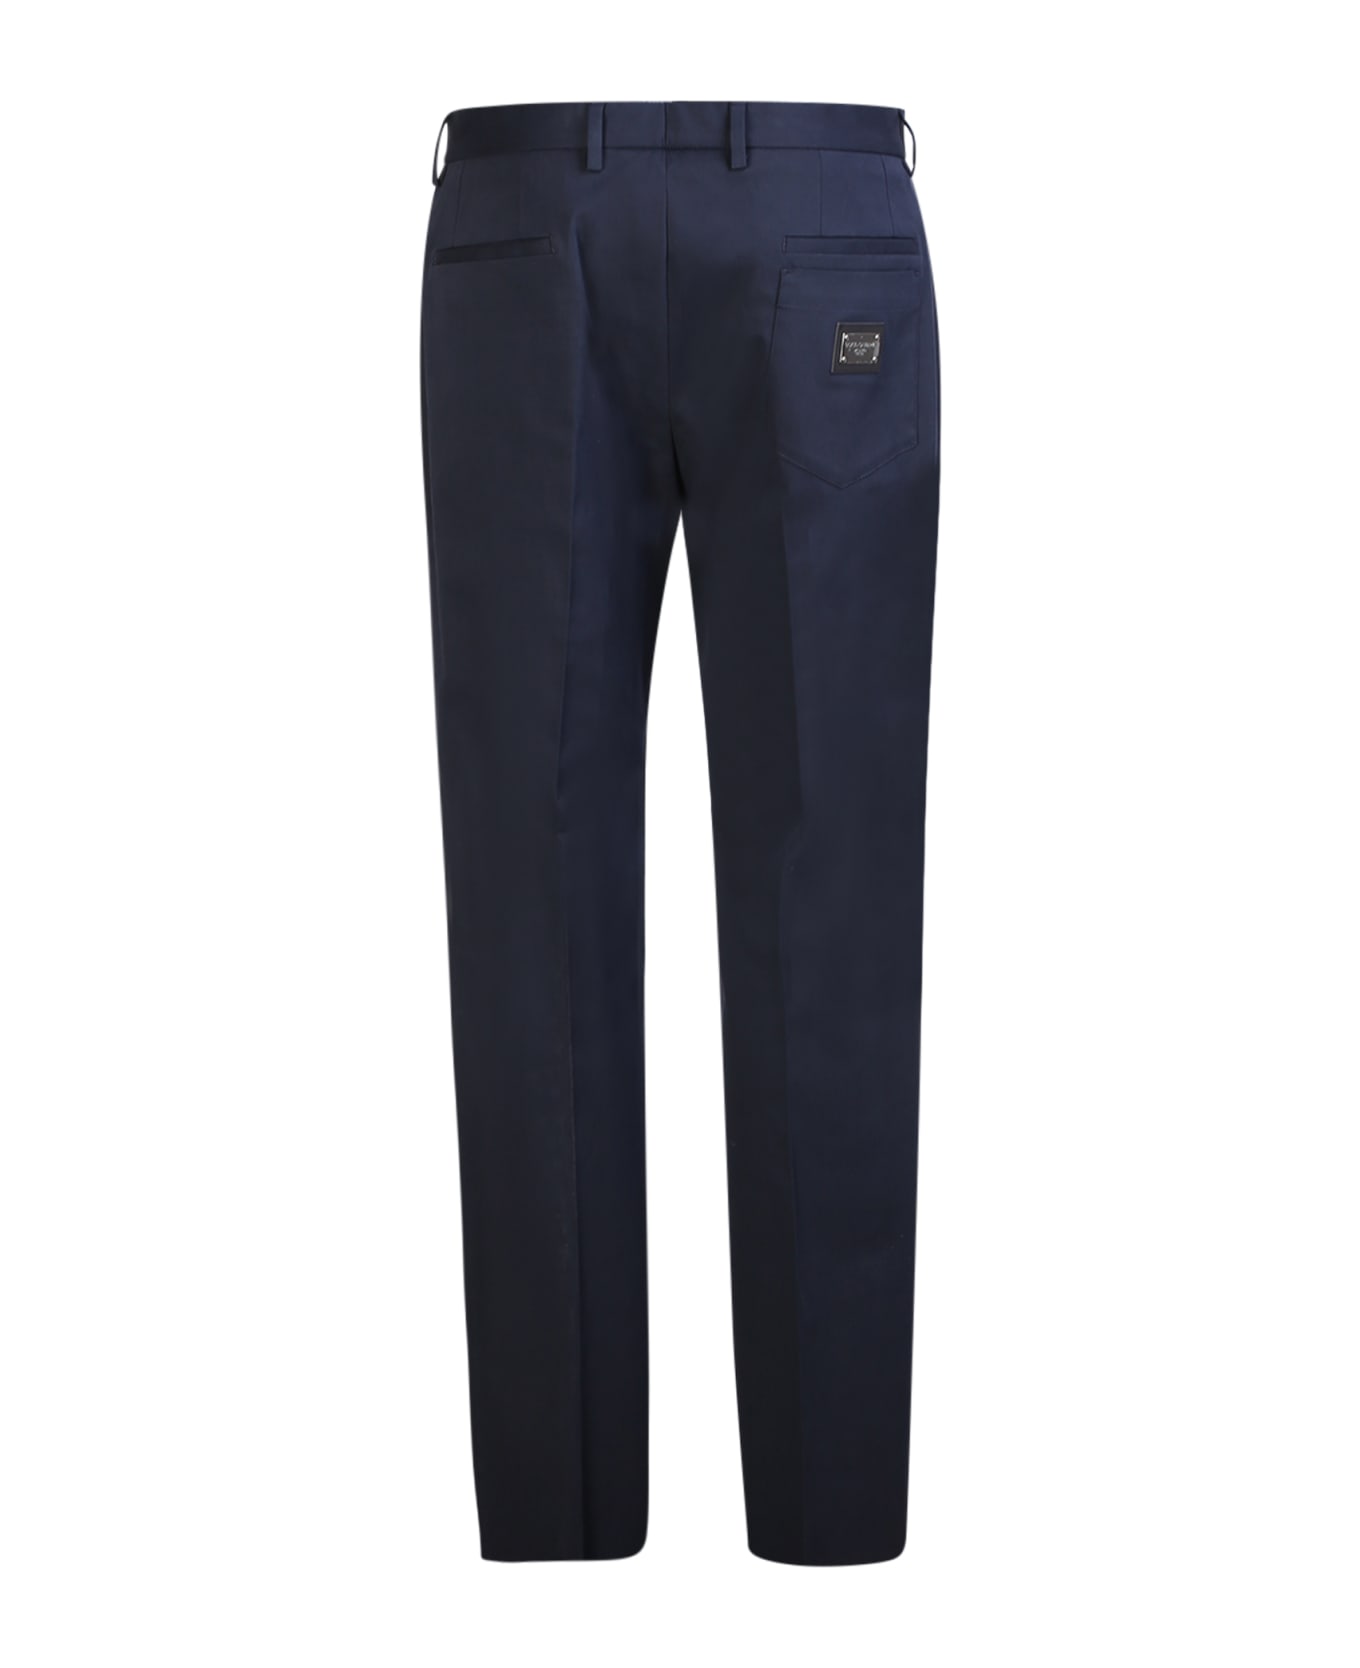 Dolce & Gabbana Logo Patch Tailored Trousers - Blue